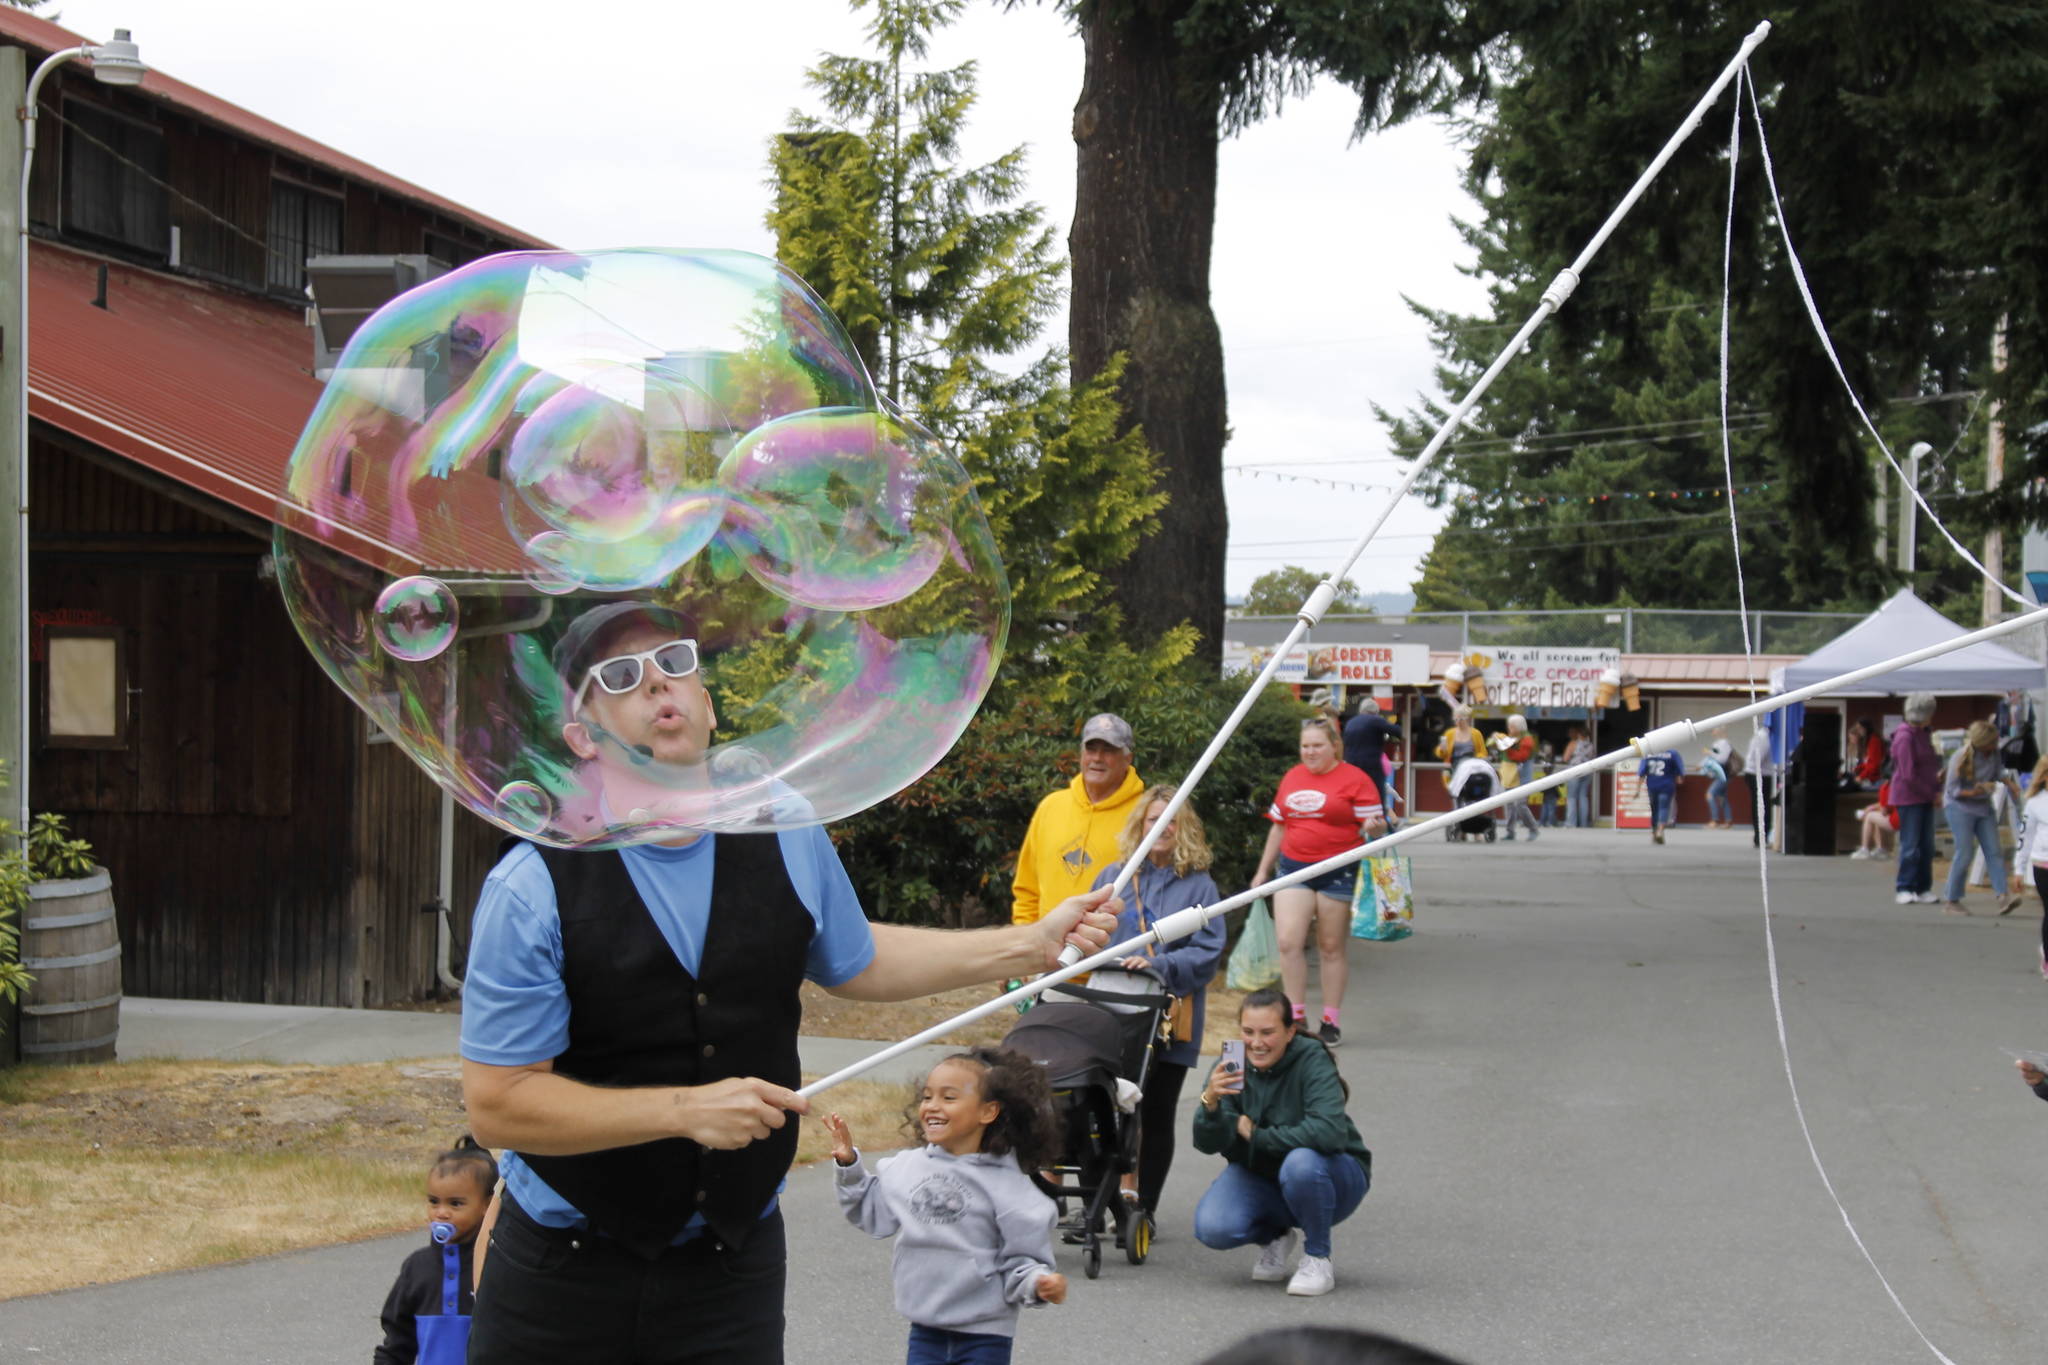 “Bubble Guy” Matt Henry blows a big bubble for children to chase at the Whidbey Island Fair Thursday. The performer is a regular fixture at the fair, which runs through Sunday. (Photo by Kira Erickson/South Whidbey Record)